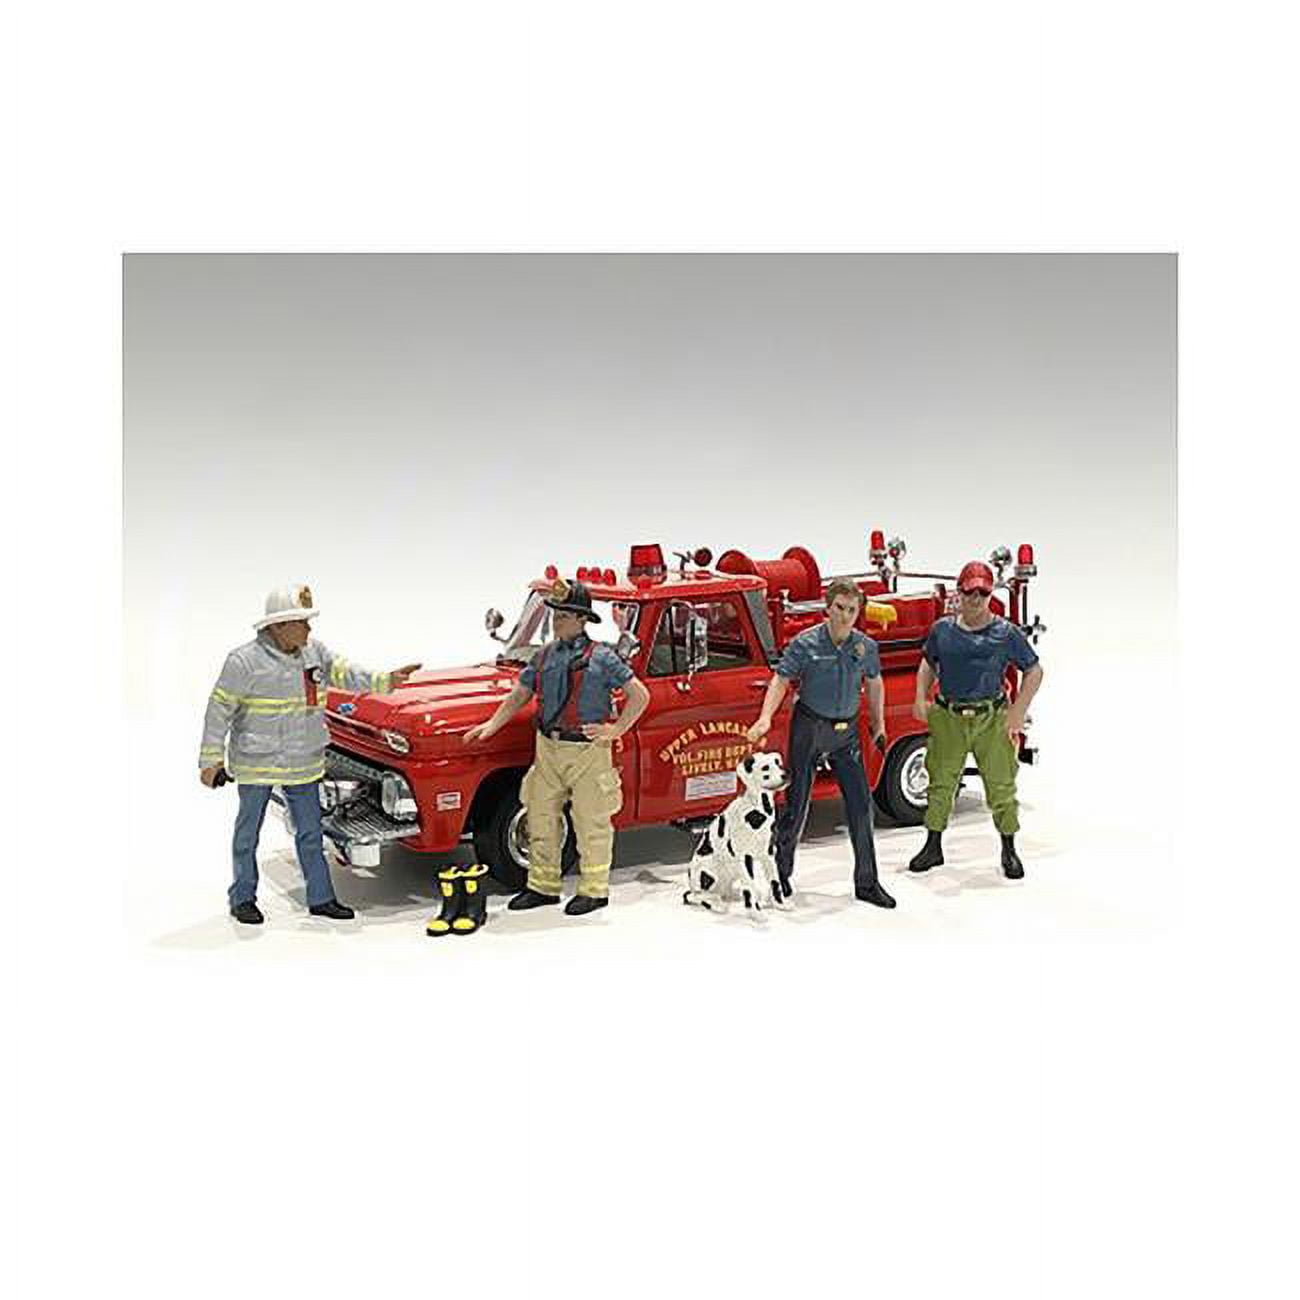 Picture of American Diorama 76318-76319-76320-76321 Firefighters 4 Males 1 Dog 1 Accessory Figure Set for 1 by 18 Scale Models - 6 Piece